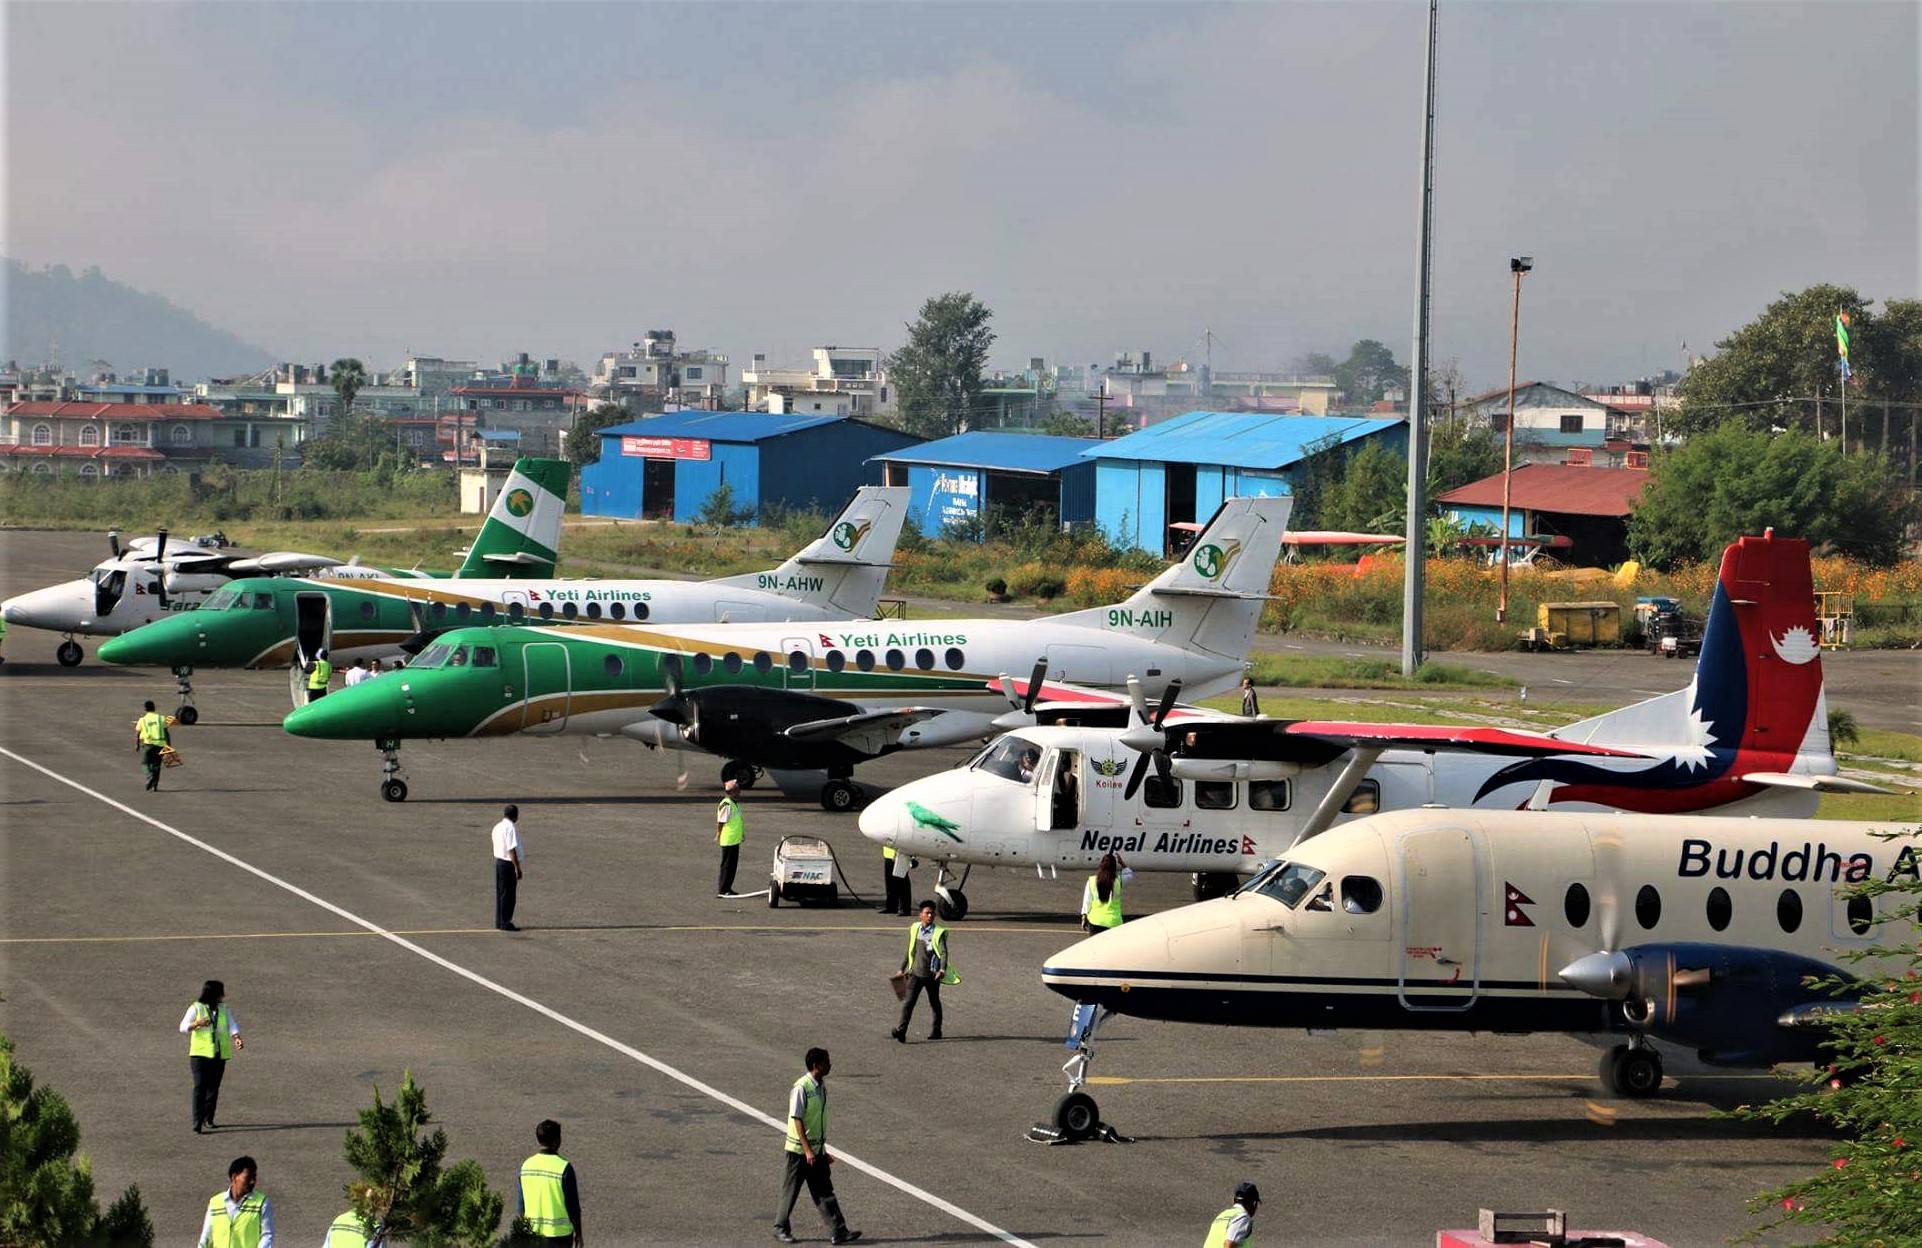 Domestic Air Fares Has Increased in Nepal, Check Rates